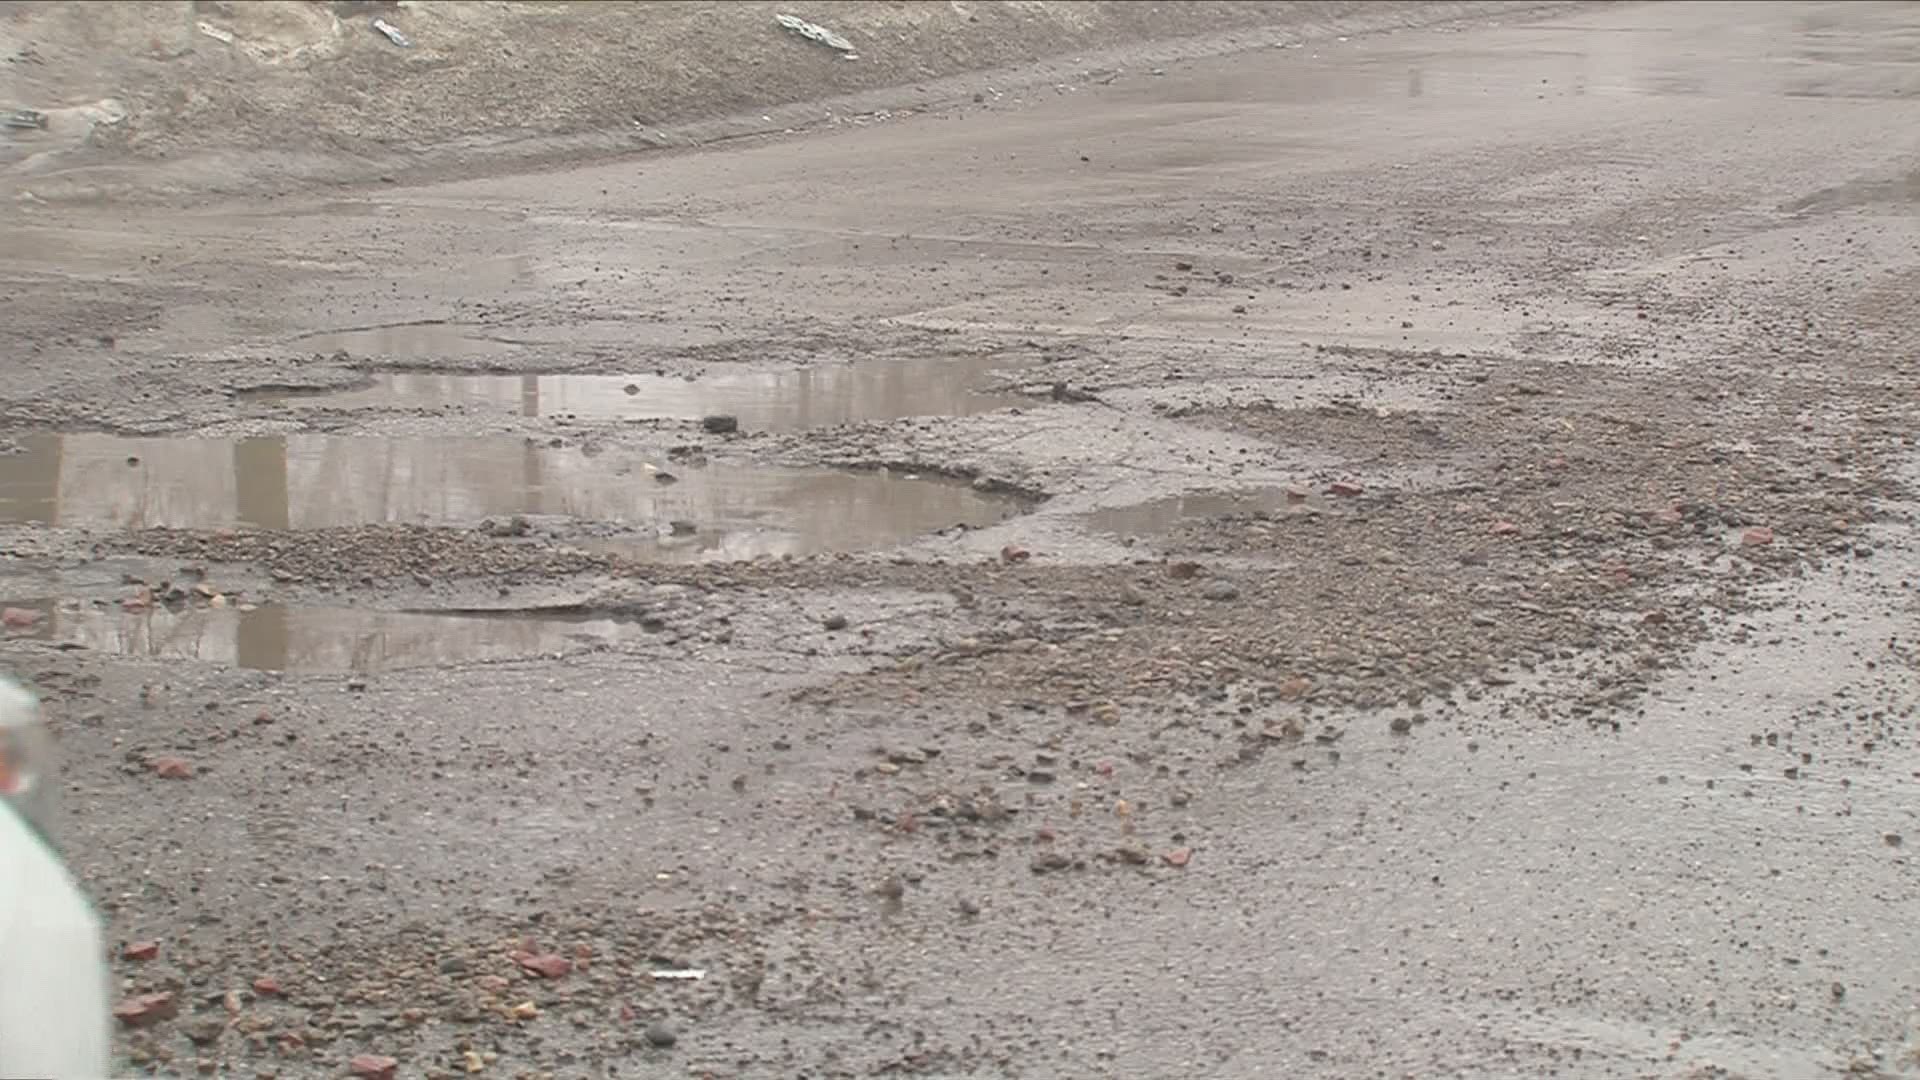 If you've ever complained about the condition City of Des Moines roads, there maybe be some relief on the horizon.